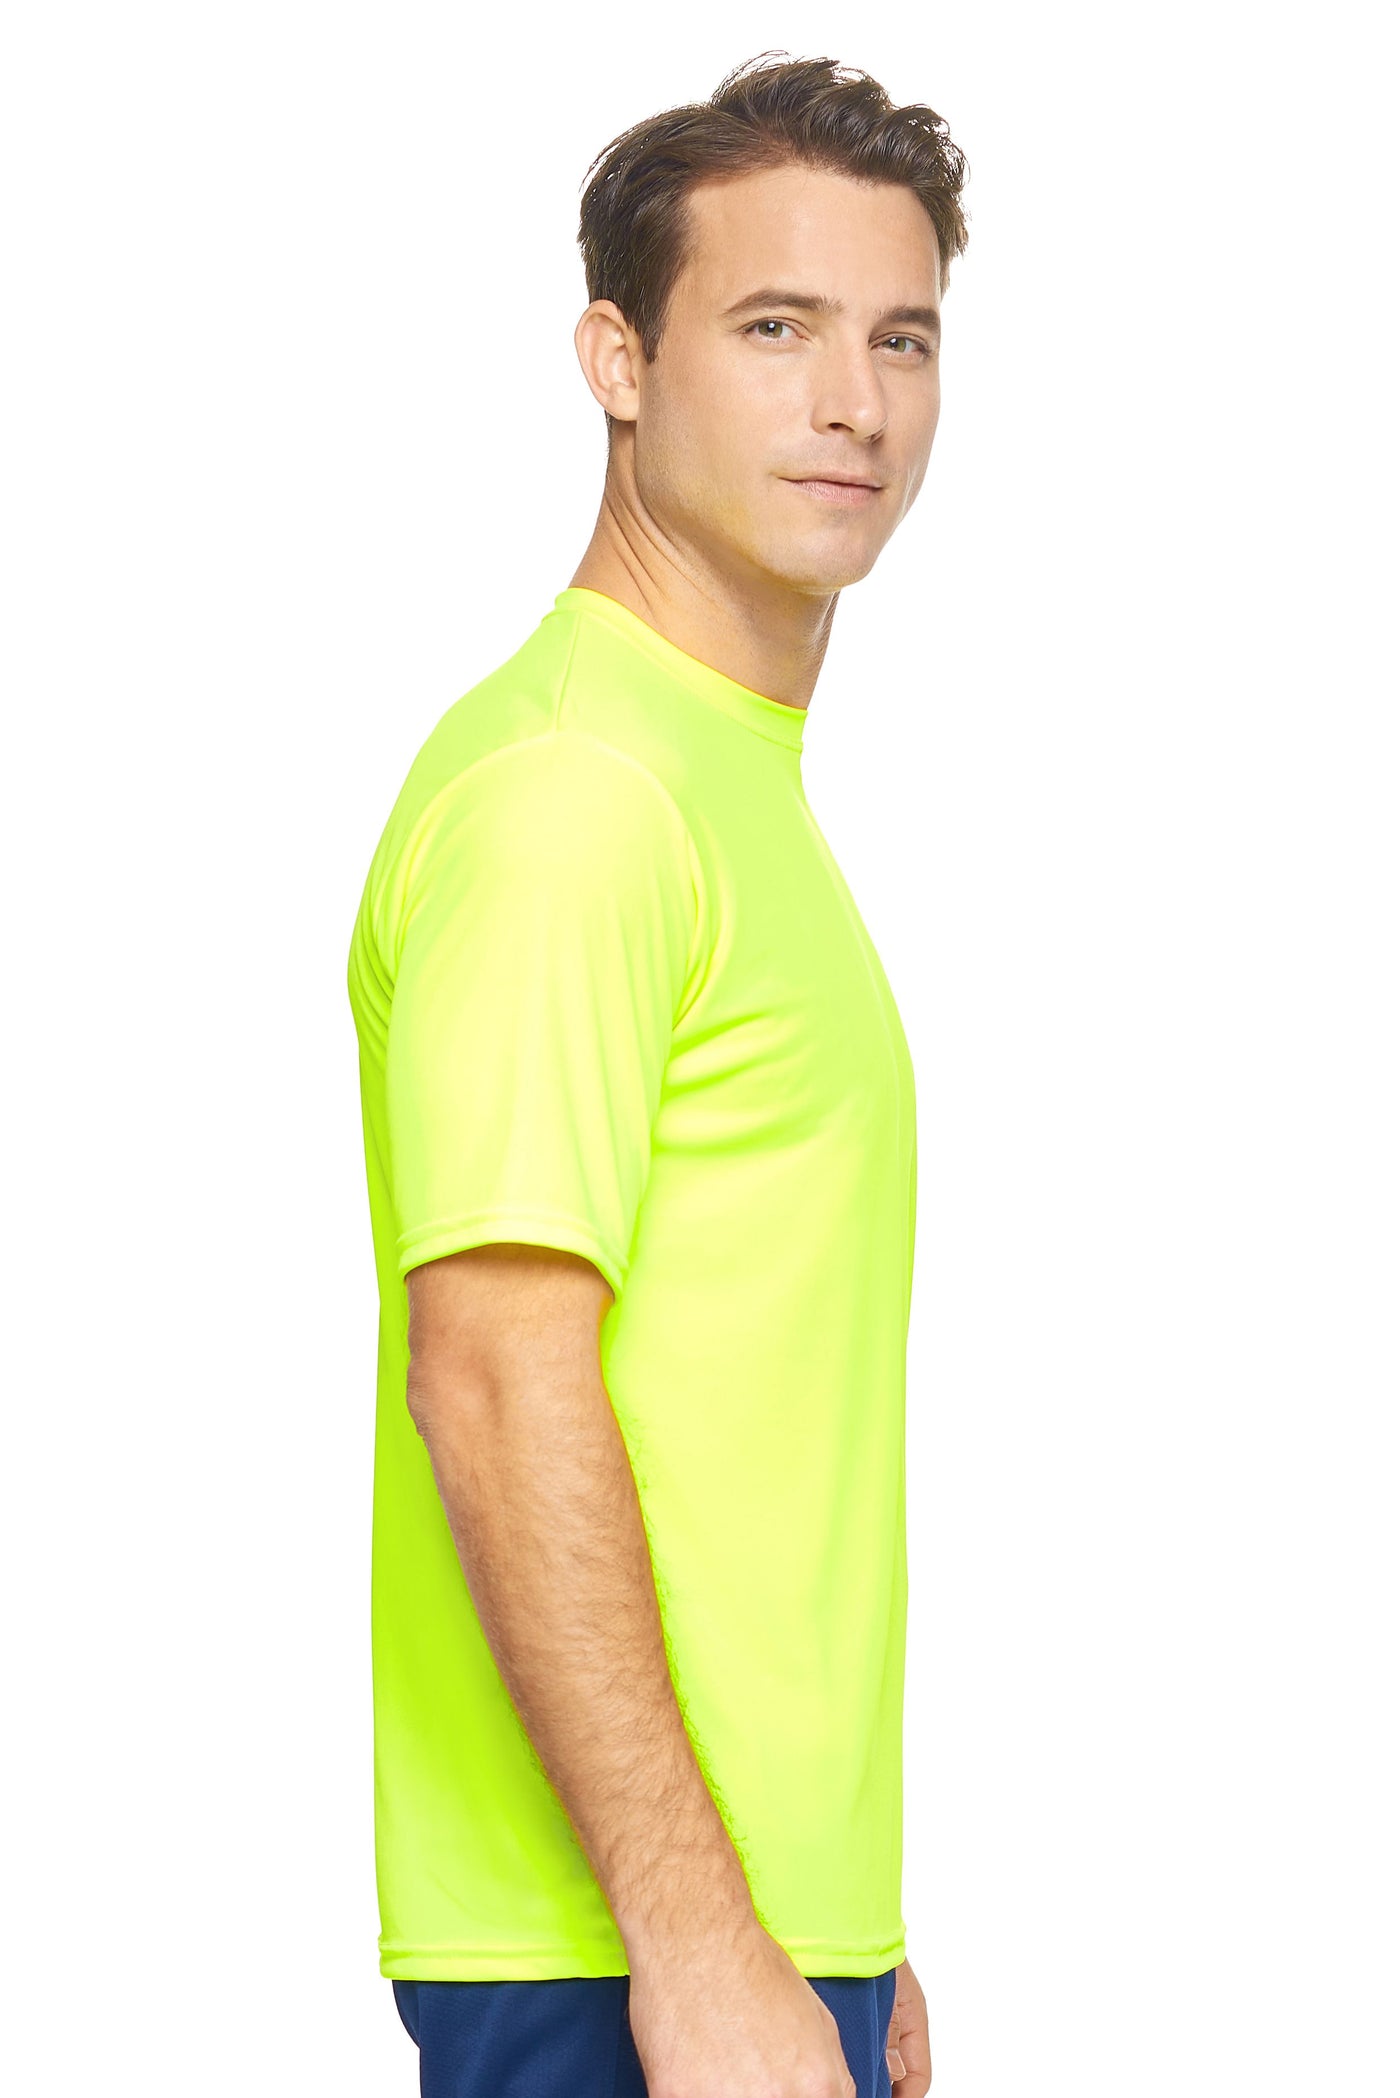 Expert Brand Retail Made in USA Men's Sportswear Activewear Running Long Sleeve Shirt Pk Max safety yellow 2#color_safety-yellow